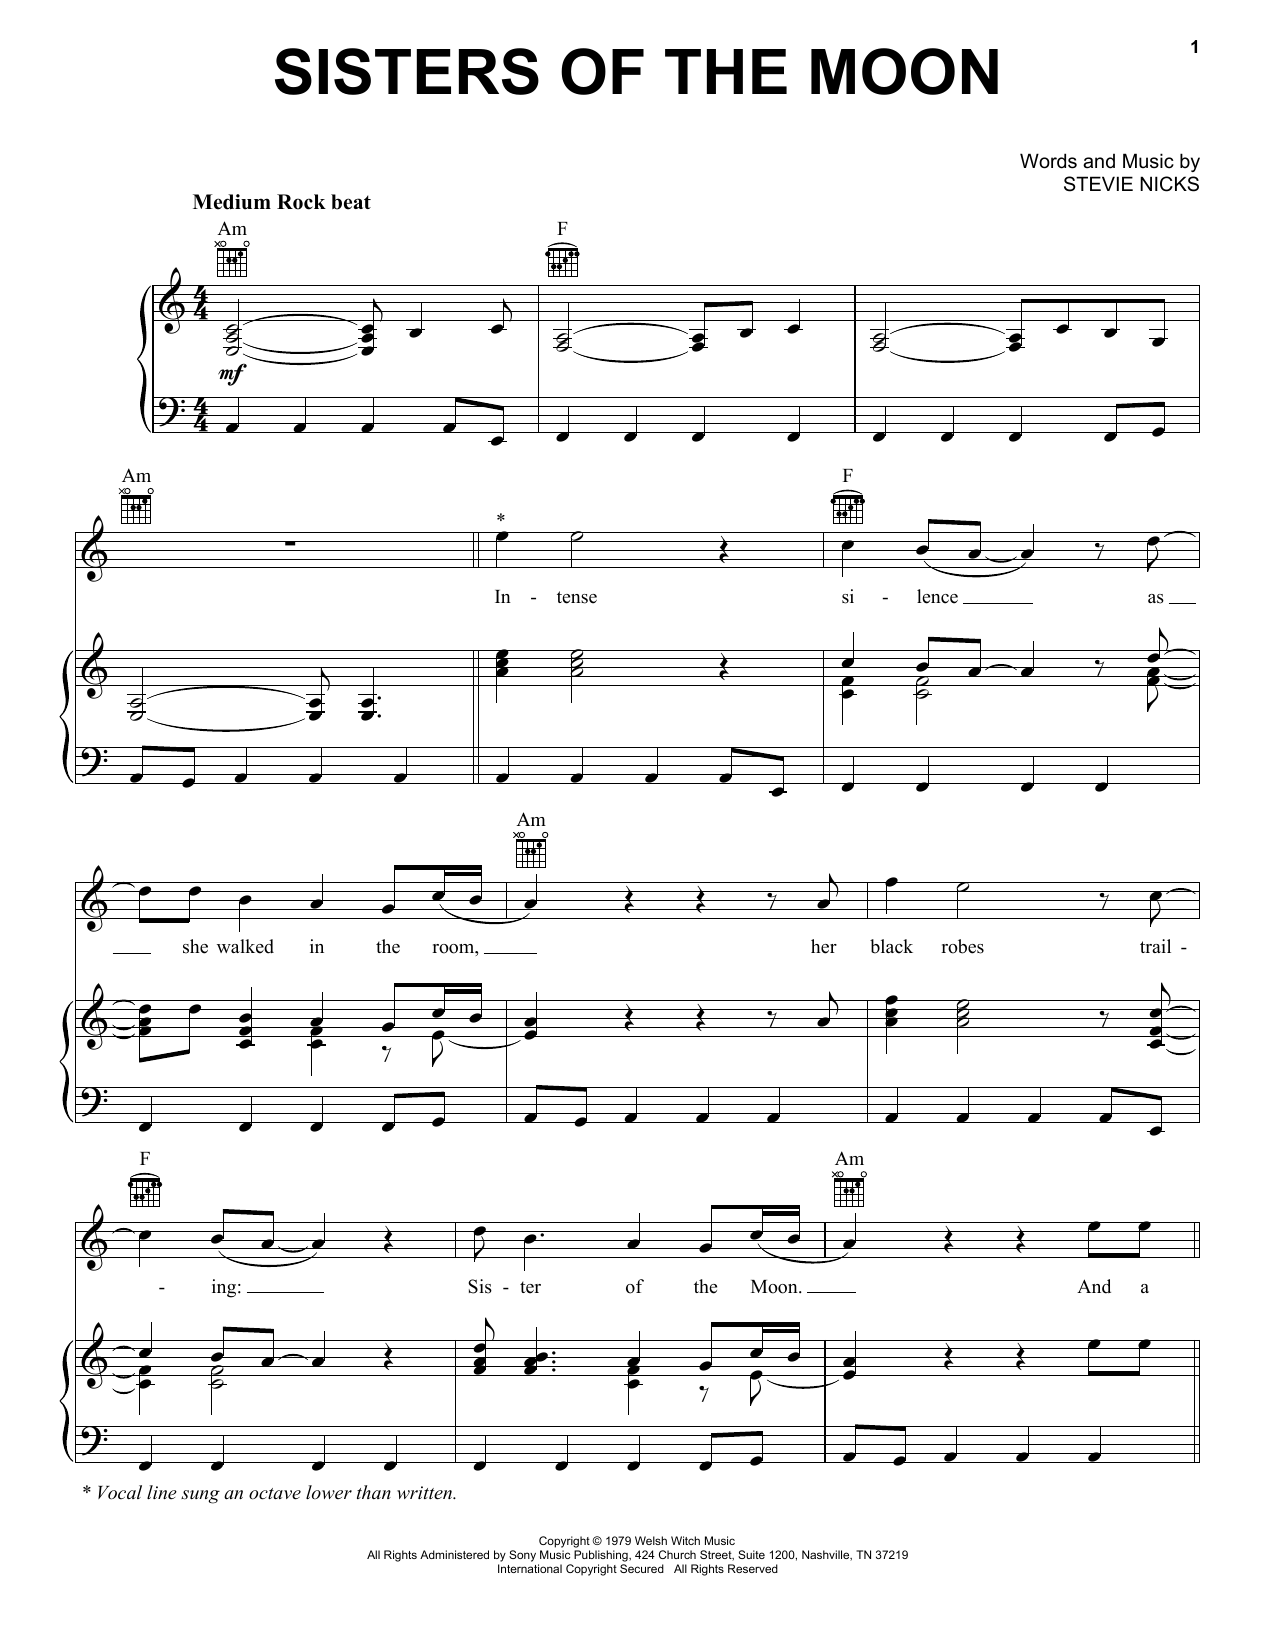 Fleetwood Mac Sisters Of The Moon sheet music notes and chords. Download Printable PDF.